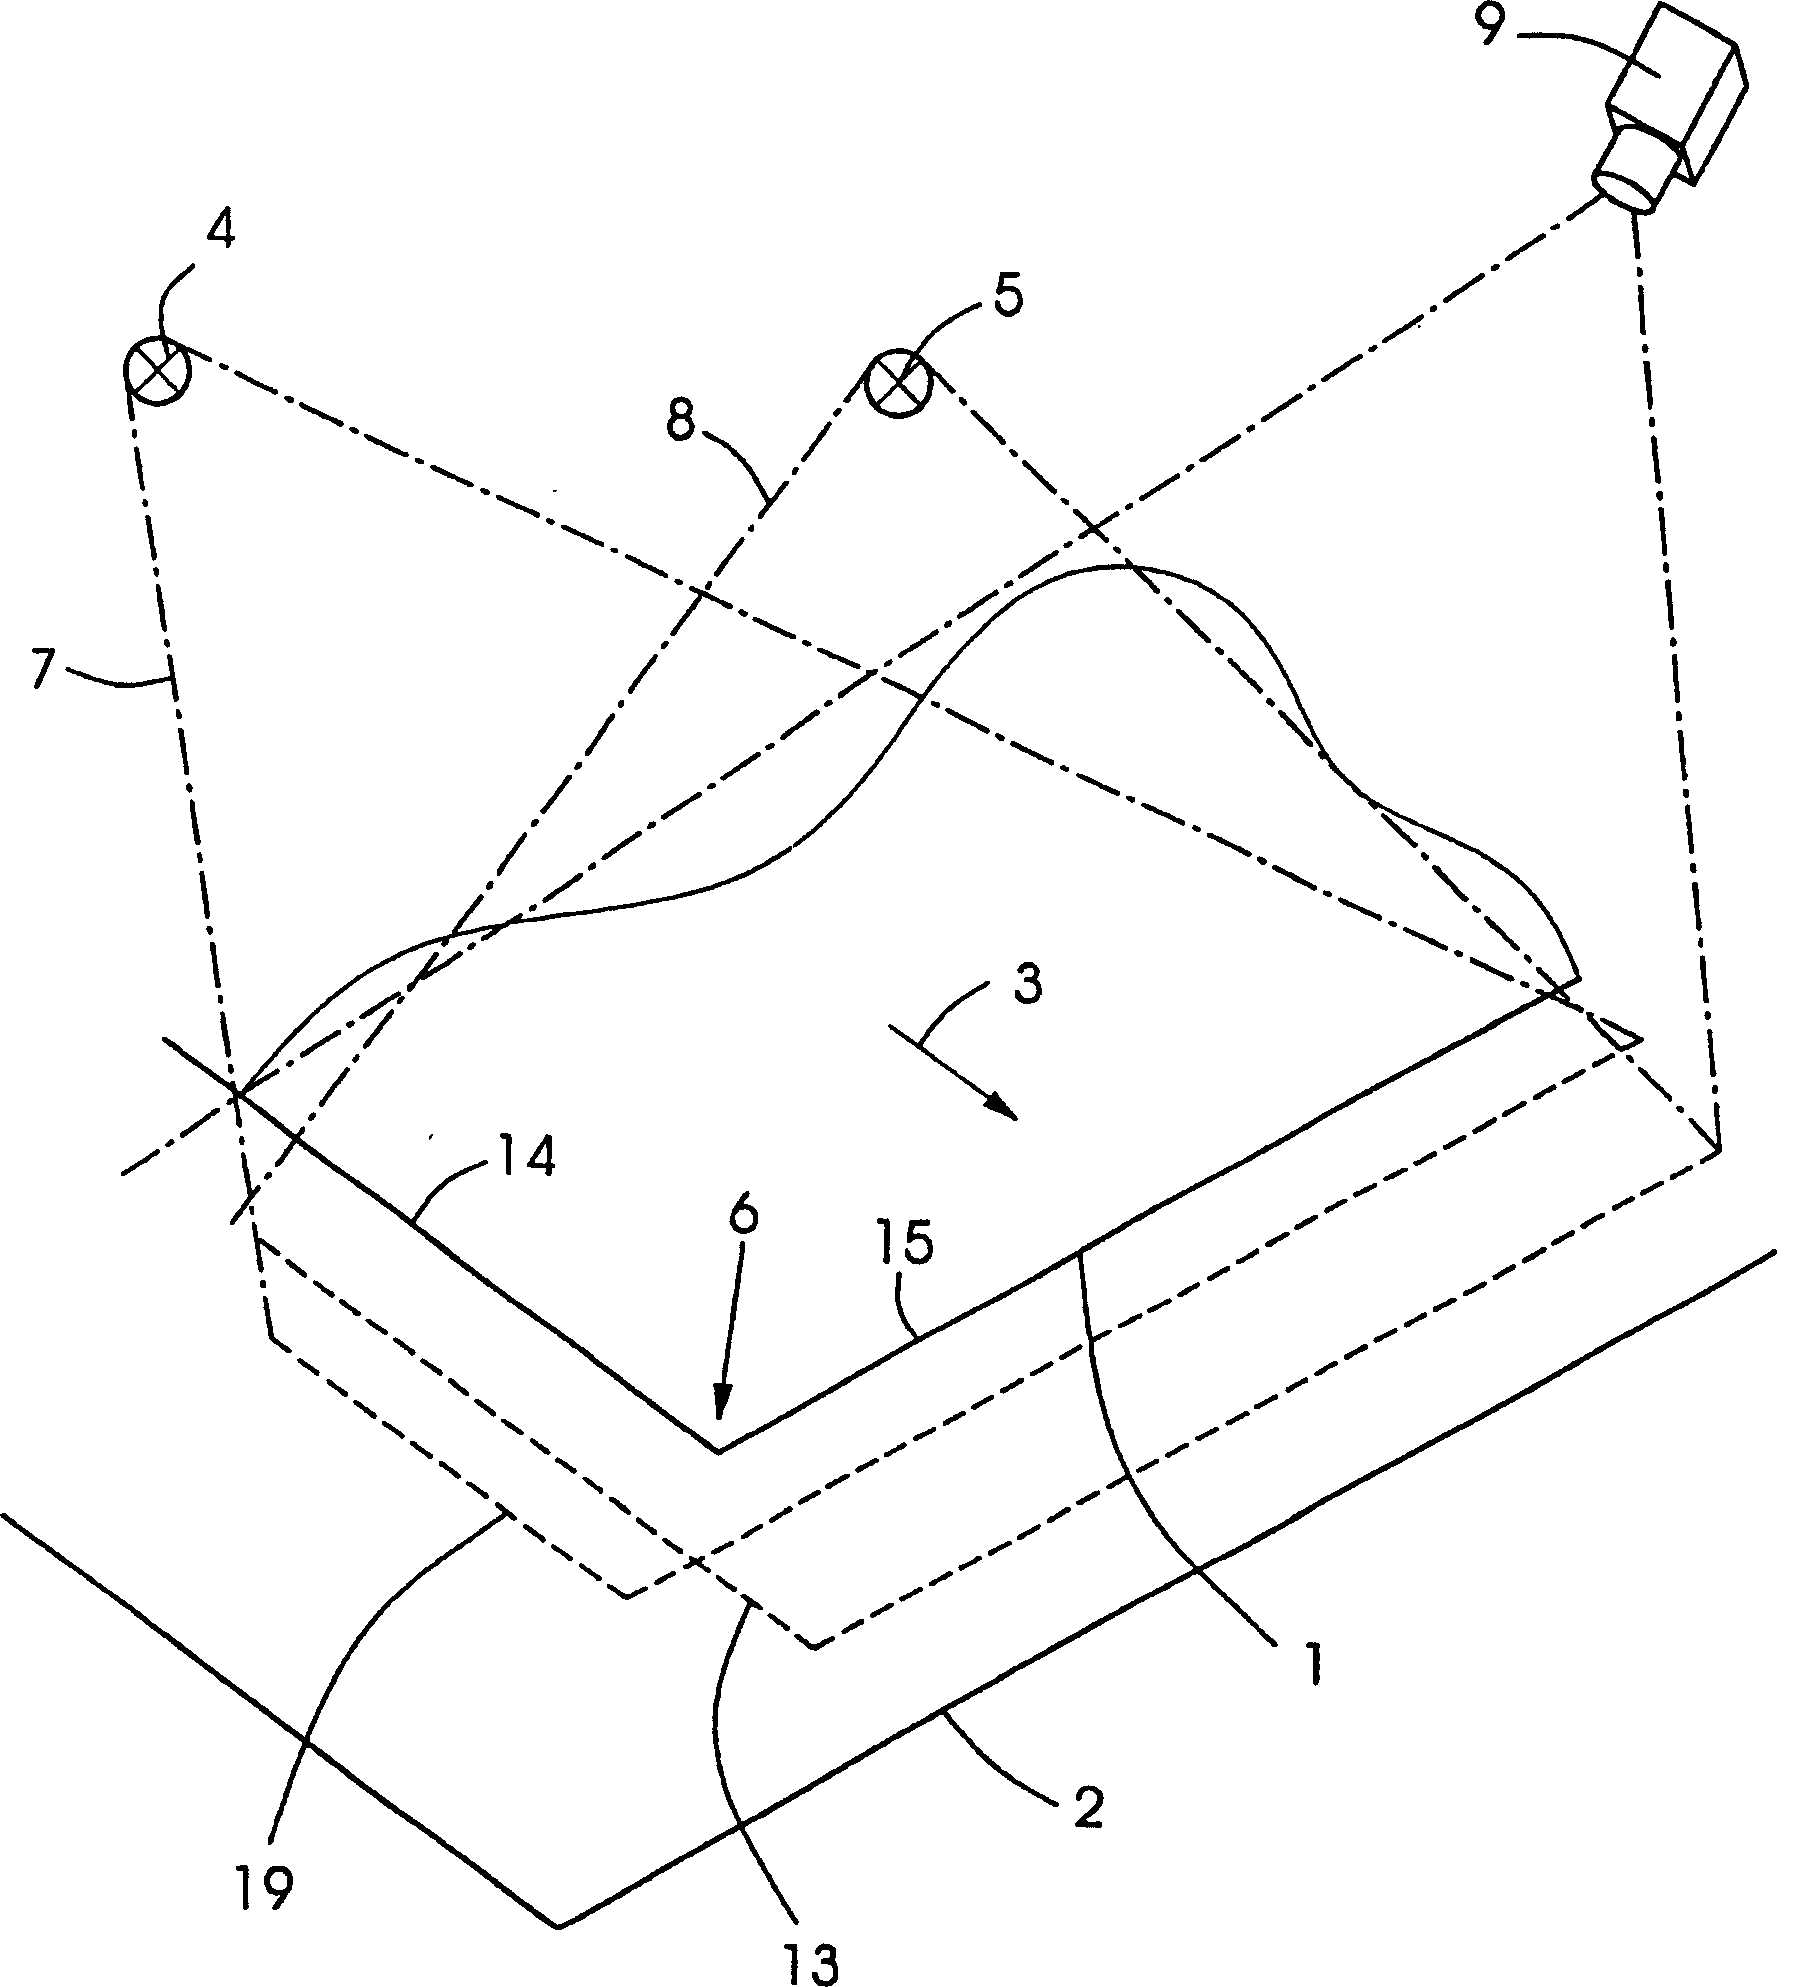 Method used for working process of printing technique controlling machine